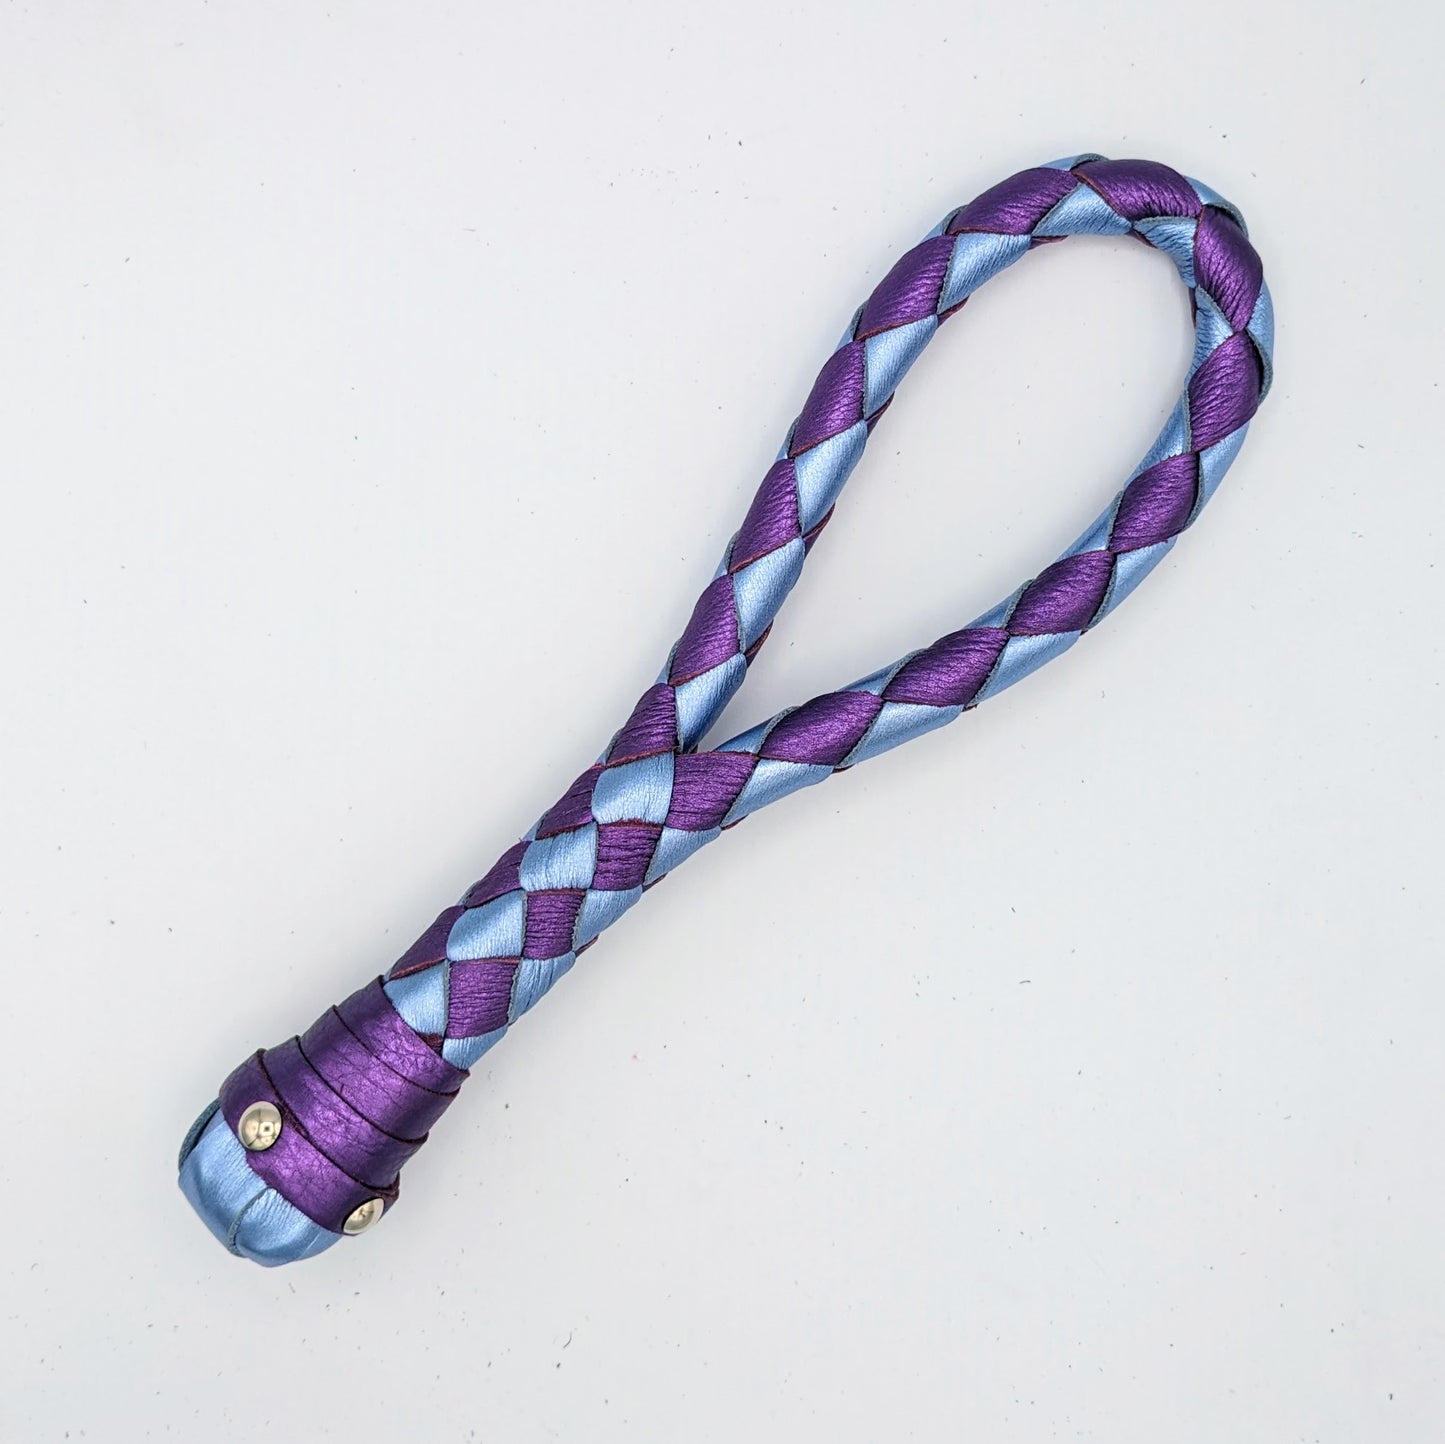 Braided Loop Cable Slapper  - Braided Leather paddle